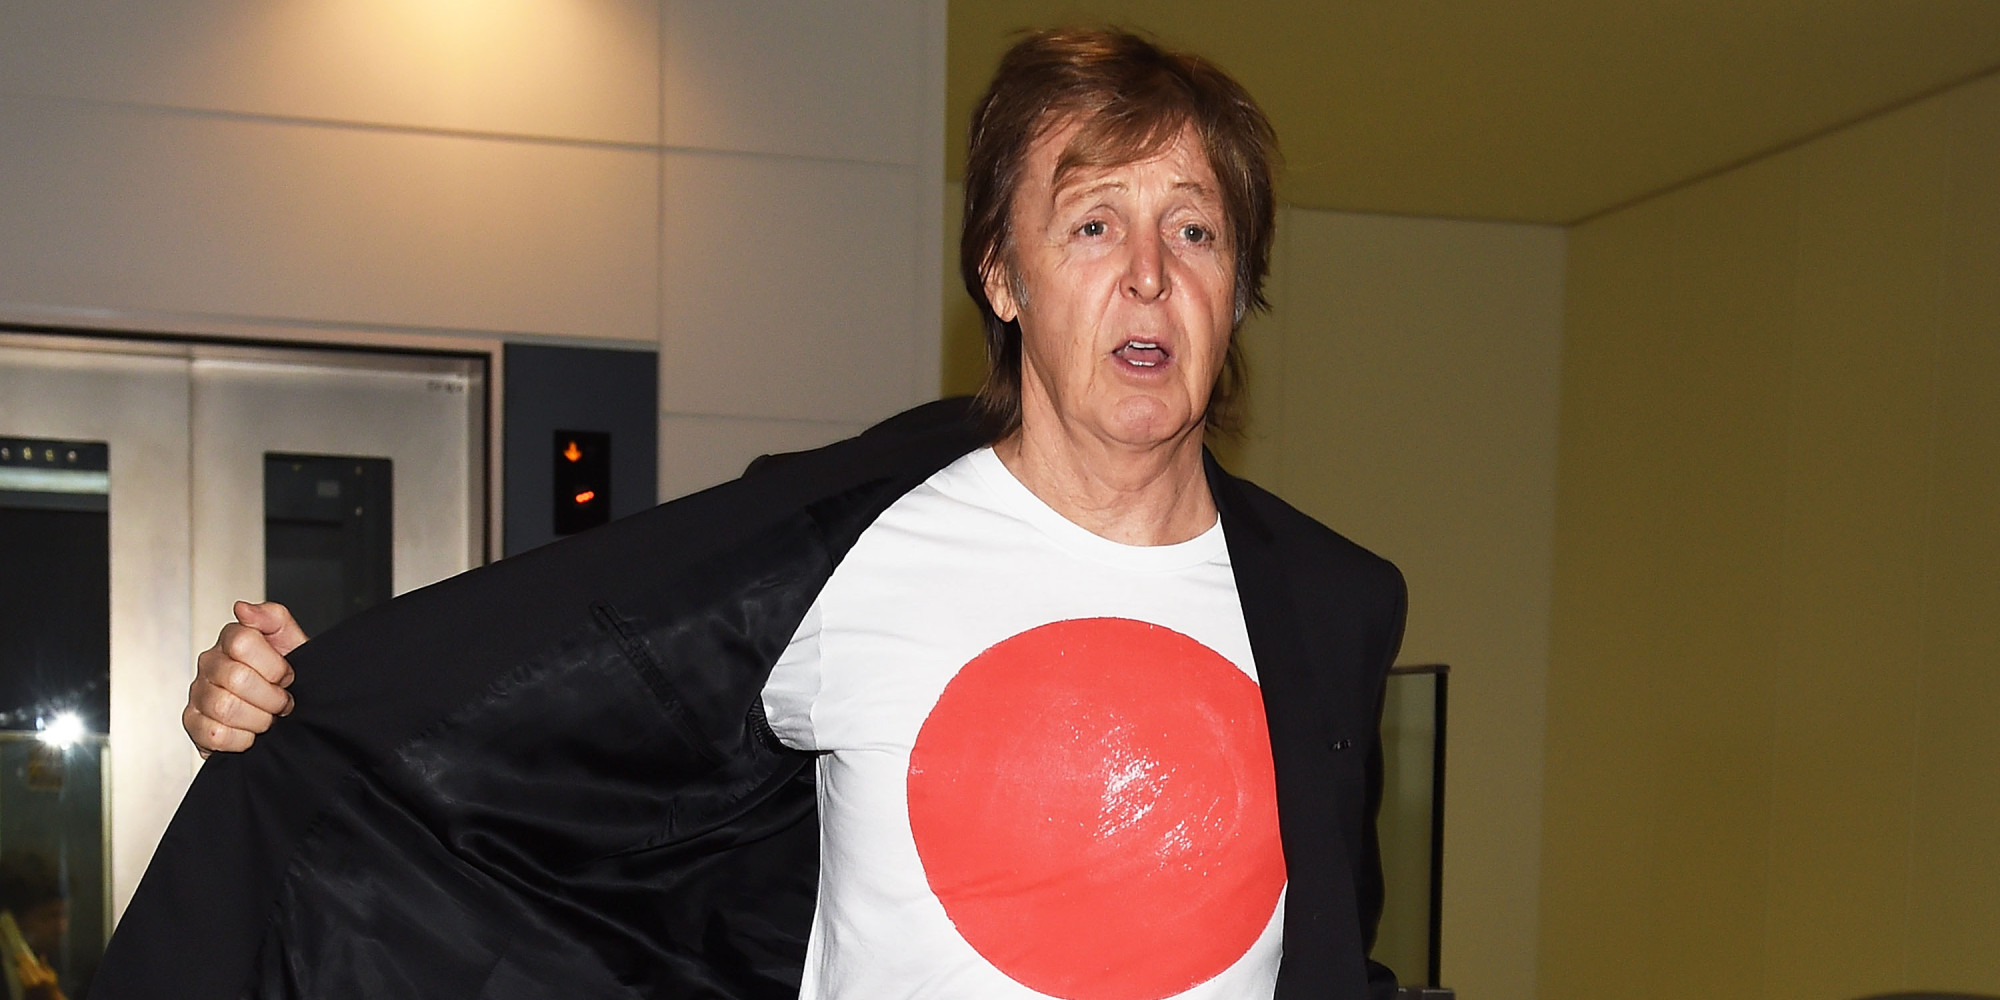 Paul McCartney To Make 'Complete Recovery' After Being Hospitalized In Japan